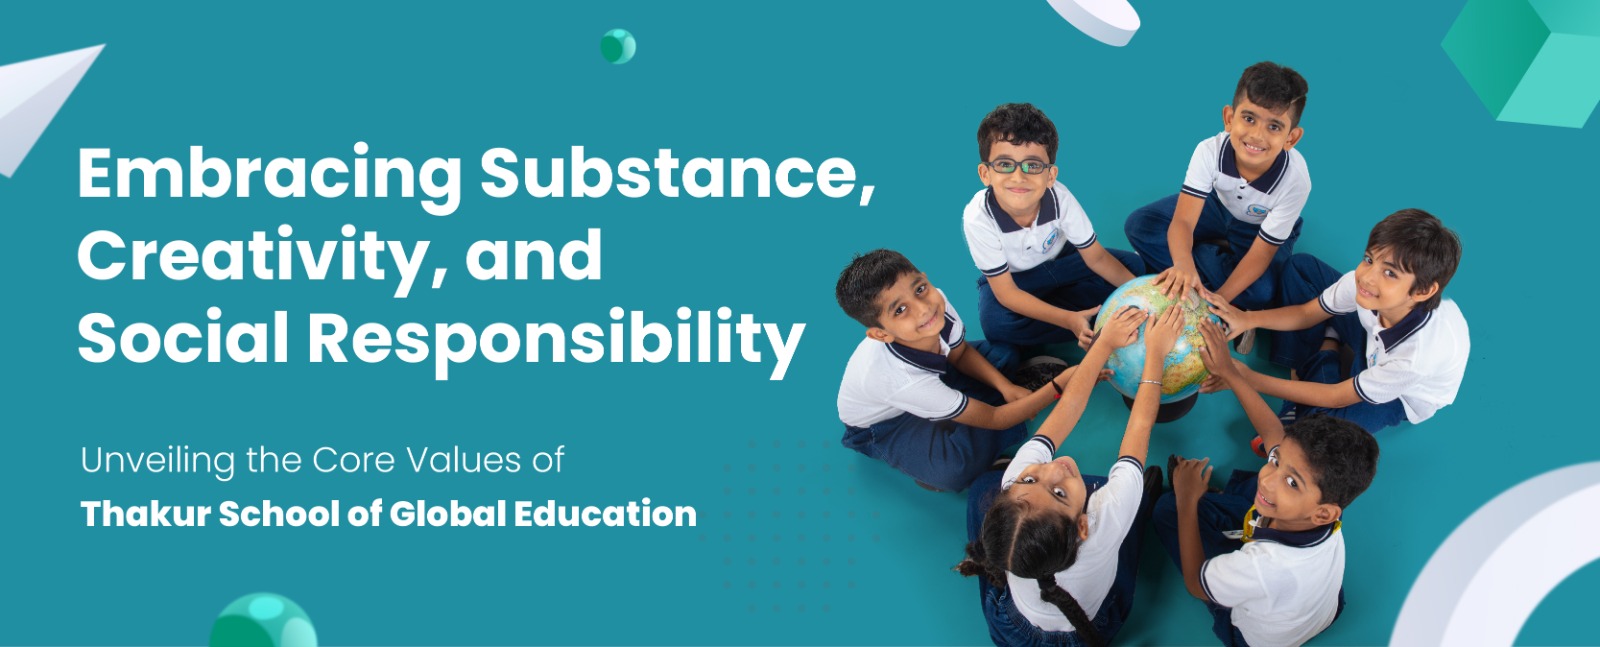 Embracing Substance, Creativity, and Social Responsibility: Unveiling the Core Values of Thakur School of Global Education